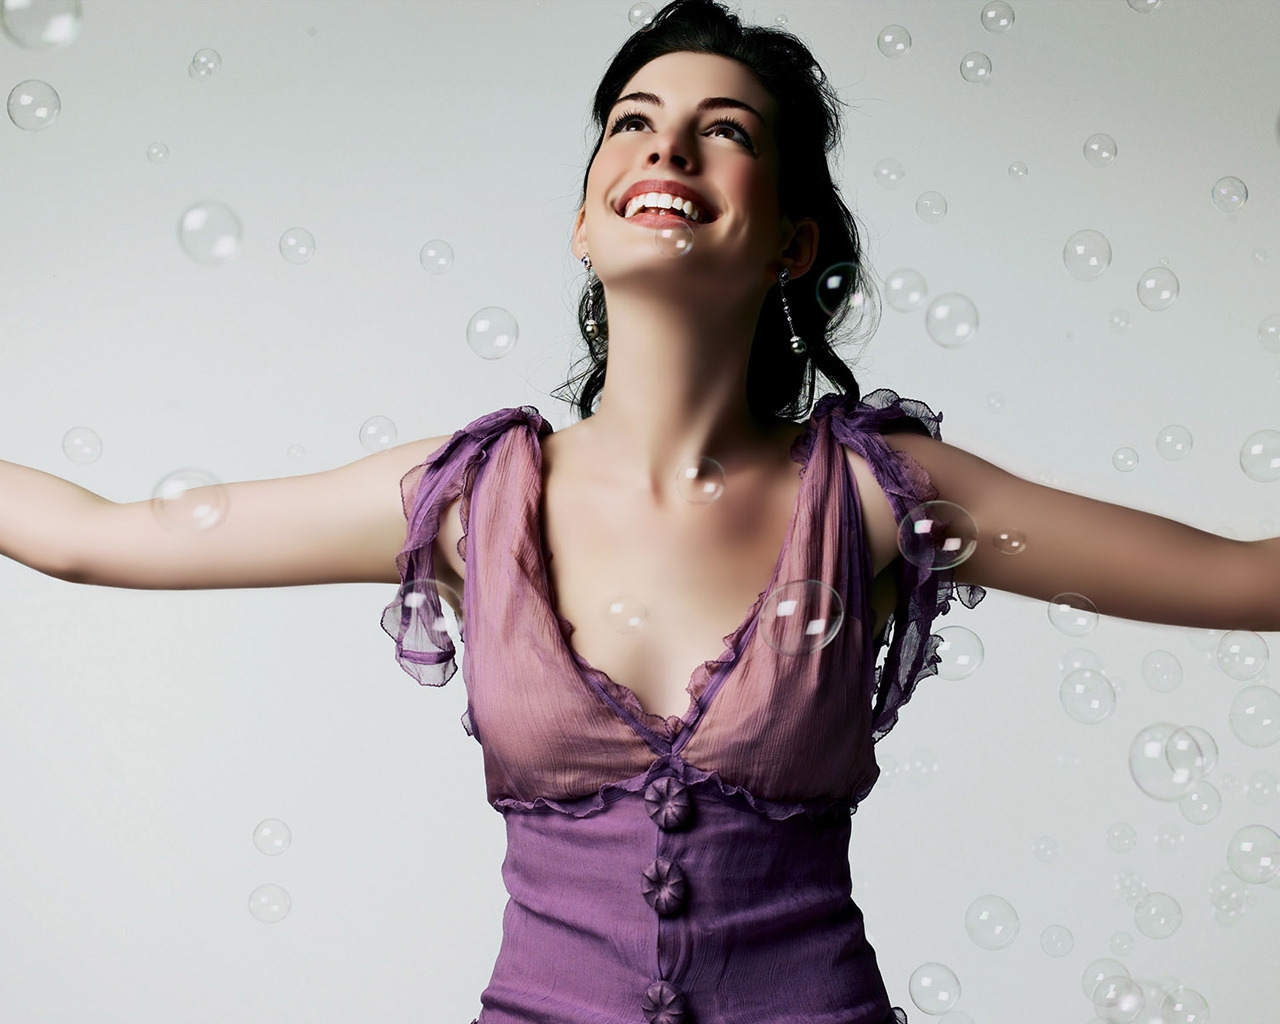 Anne Hathaway Bubbles for 1280 x 1024 resolution